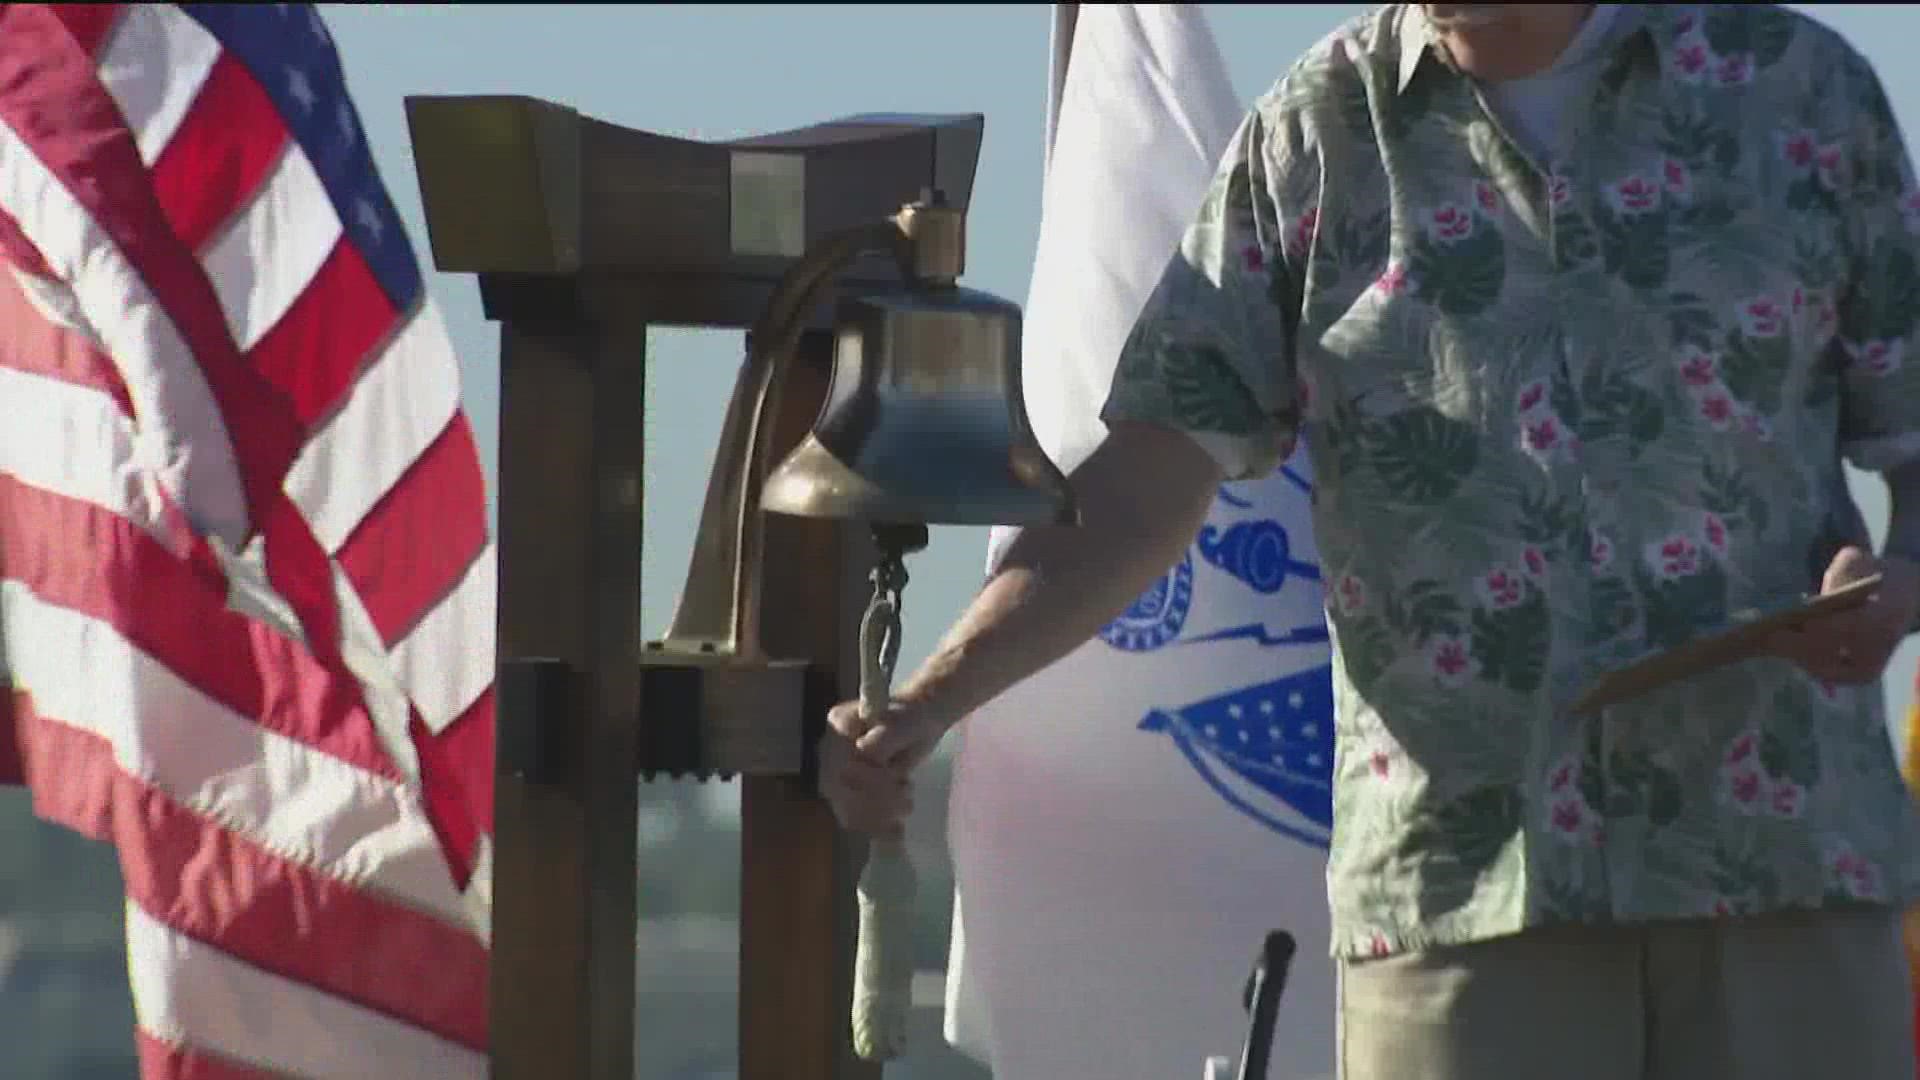 Daniel Fletcher Harris, a sailor killed in the attack, will finally be laid to rest at Fort Rosecrans National Cemetery.